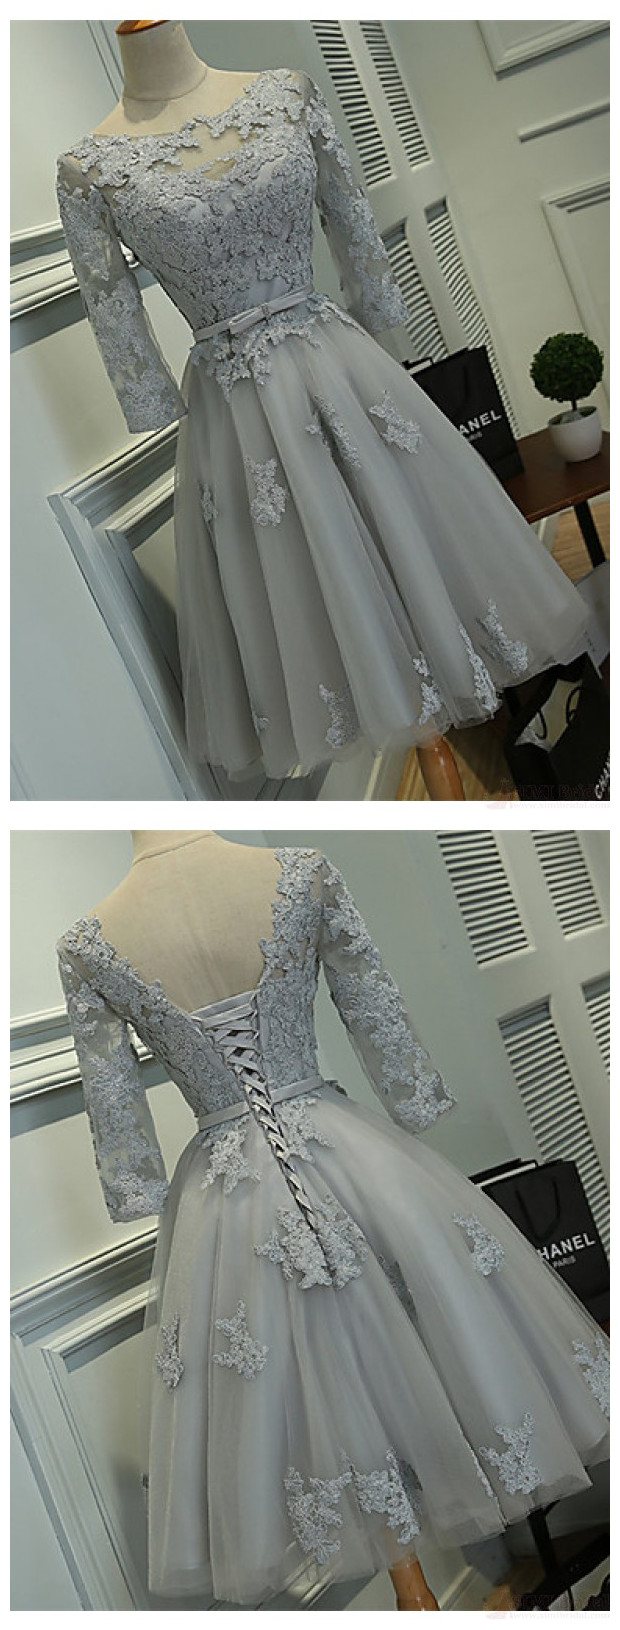 Lace Homecoming Dresses, Long Sleeve Homecoming Dresses